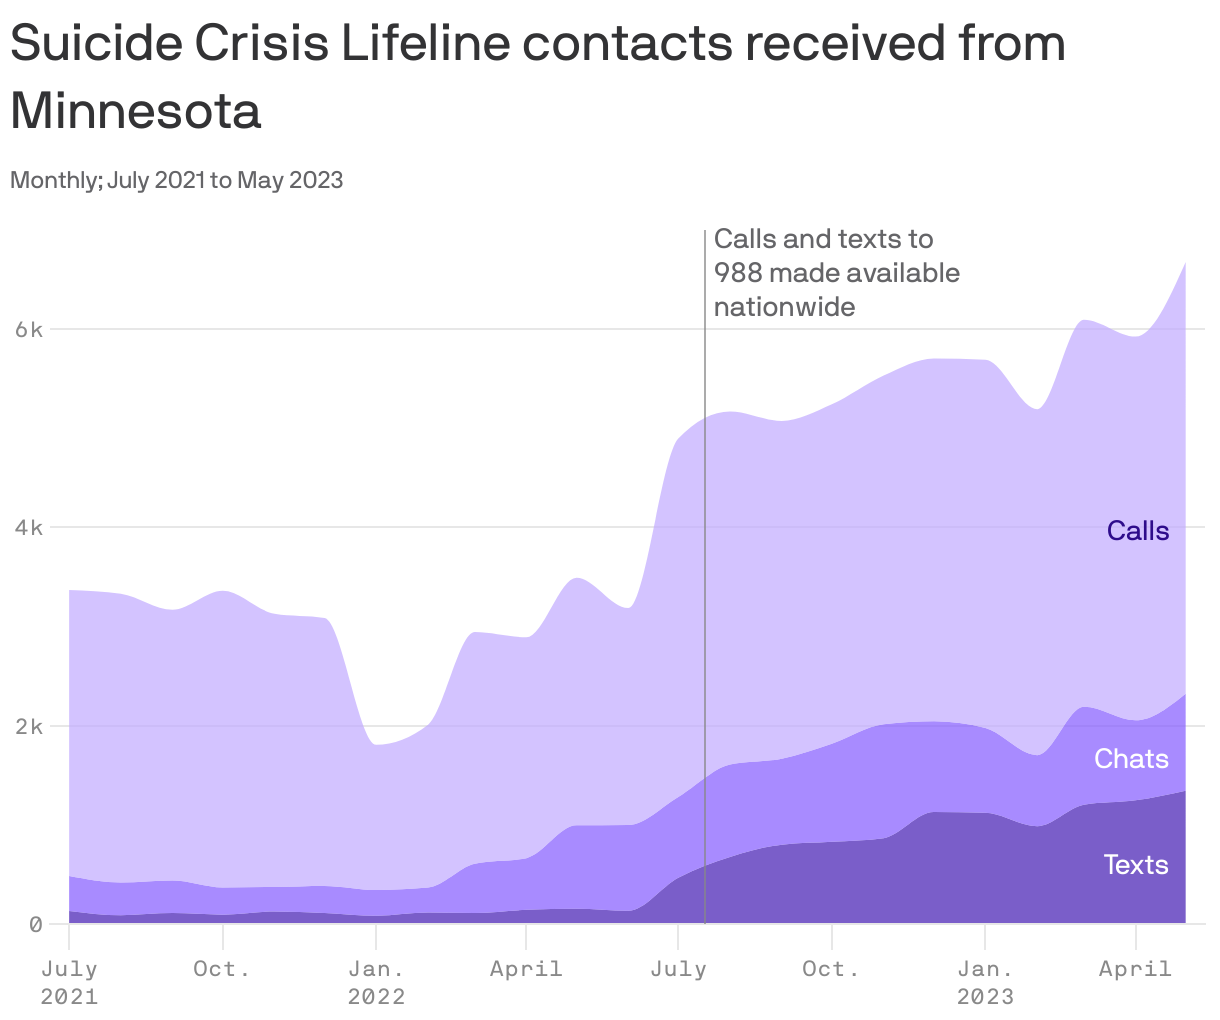 Suicide Crisis Lifeline contacts received from Minnesota